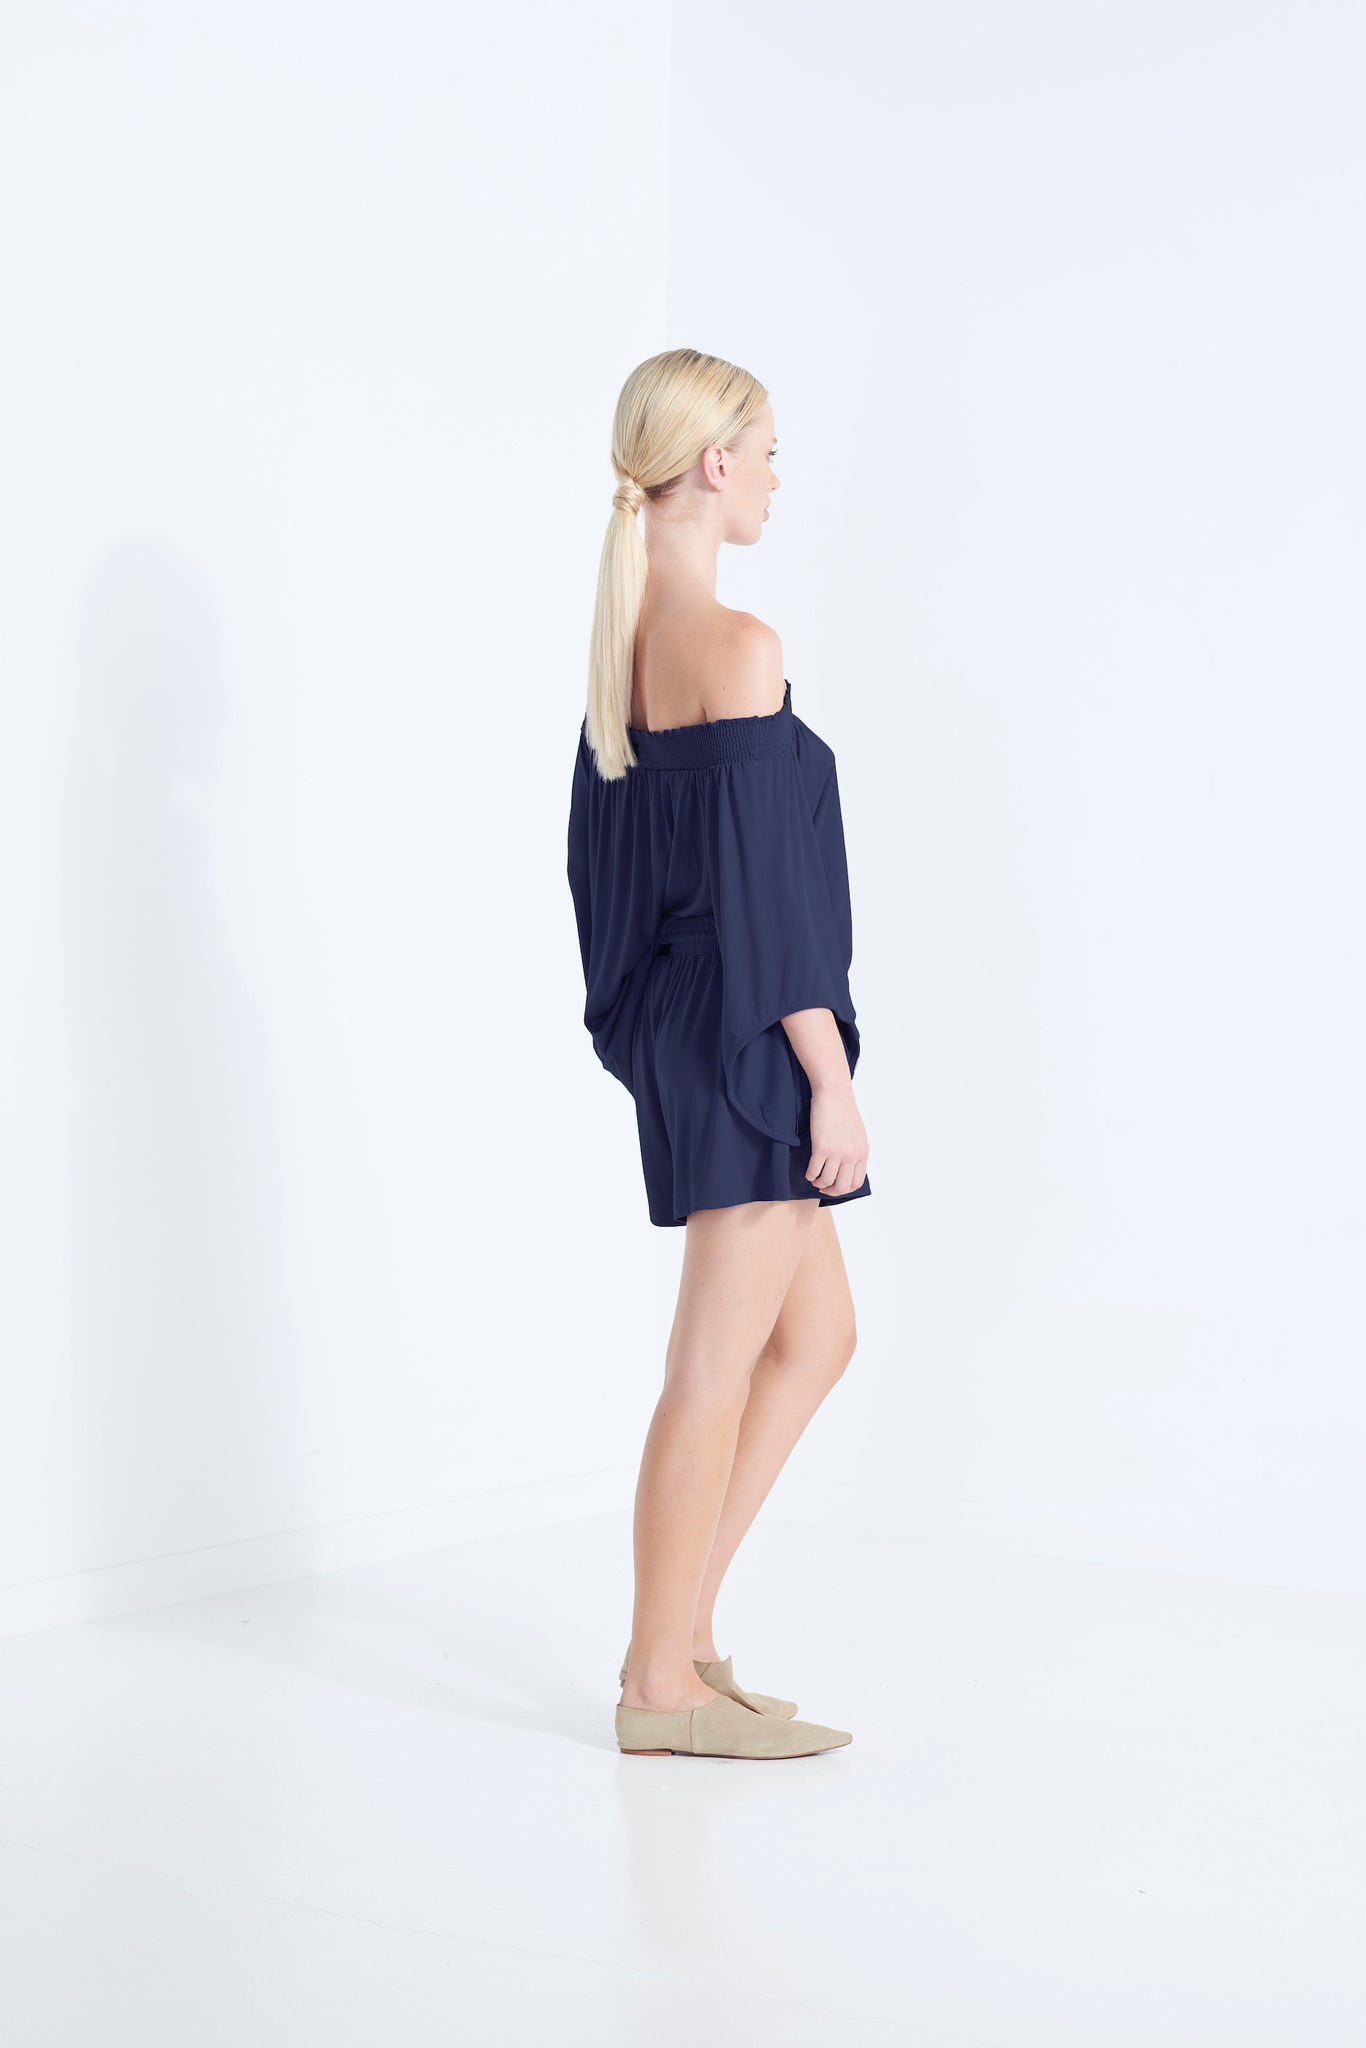 NAEVIA OFF SHOULDER TOP KNIT BEECHWOOD MODAL ELASTIC TOP WITH BELL SLEEVE AEGEAN WASHED NAVY SIDE VIEW